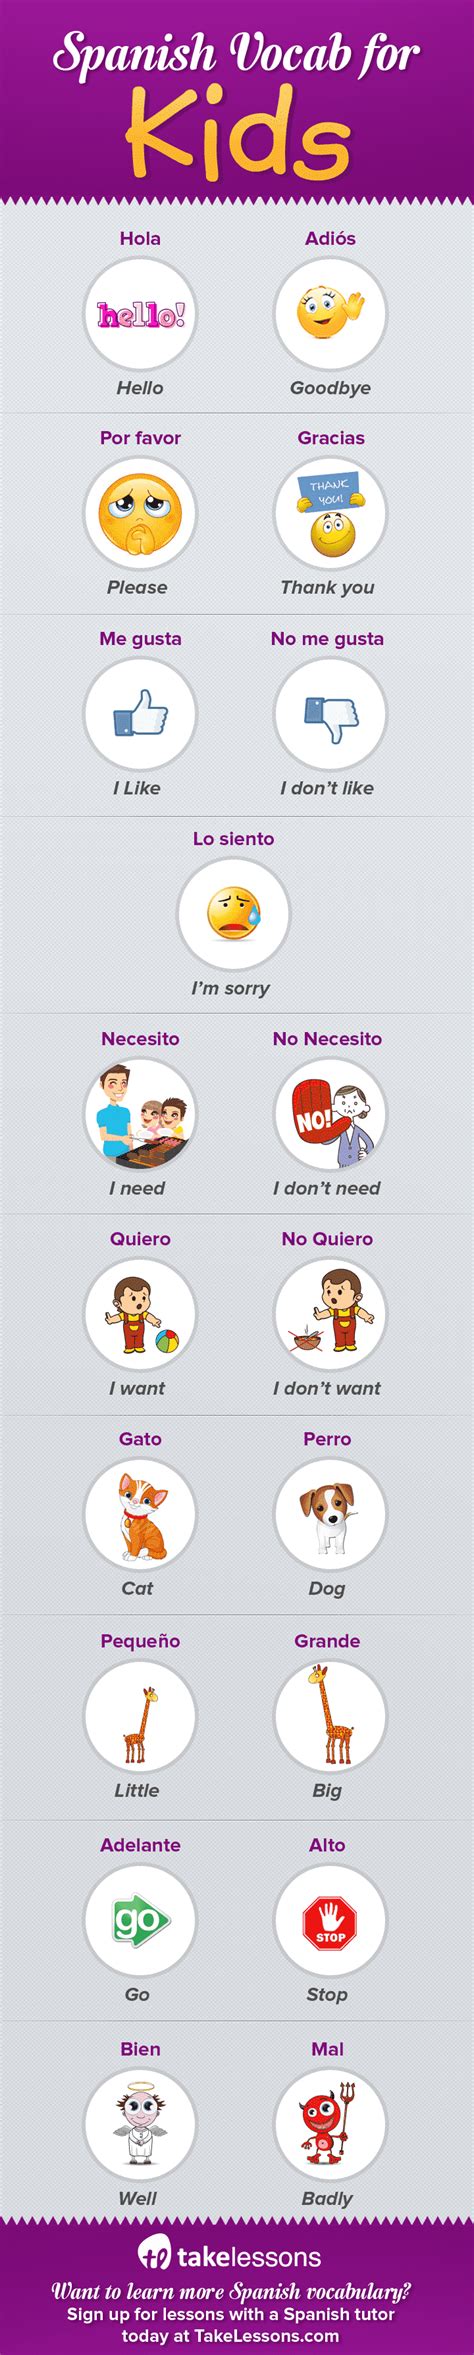 19 Easy Spanish Vocabulary Words To Teach Your Kids